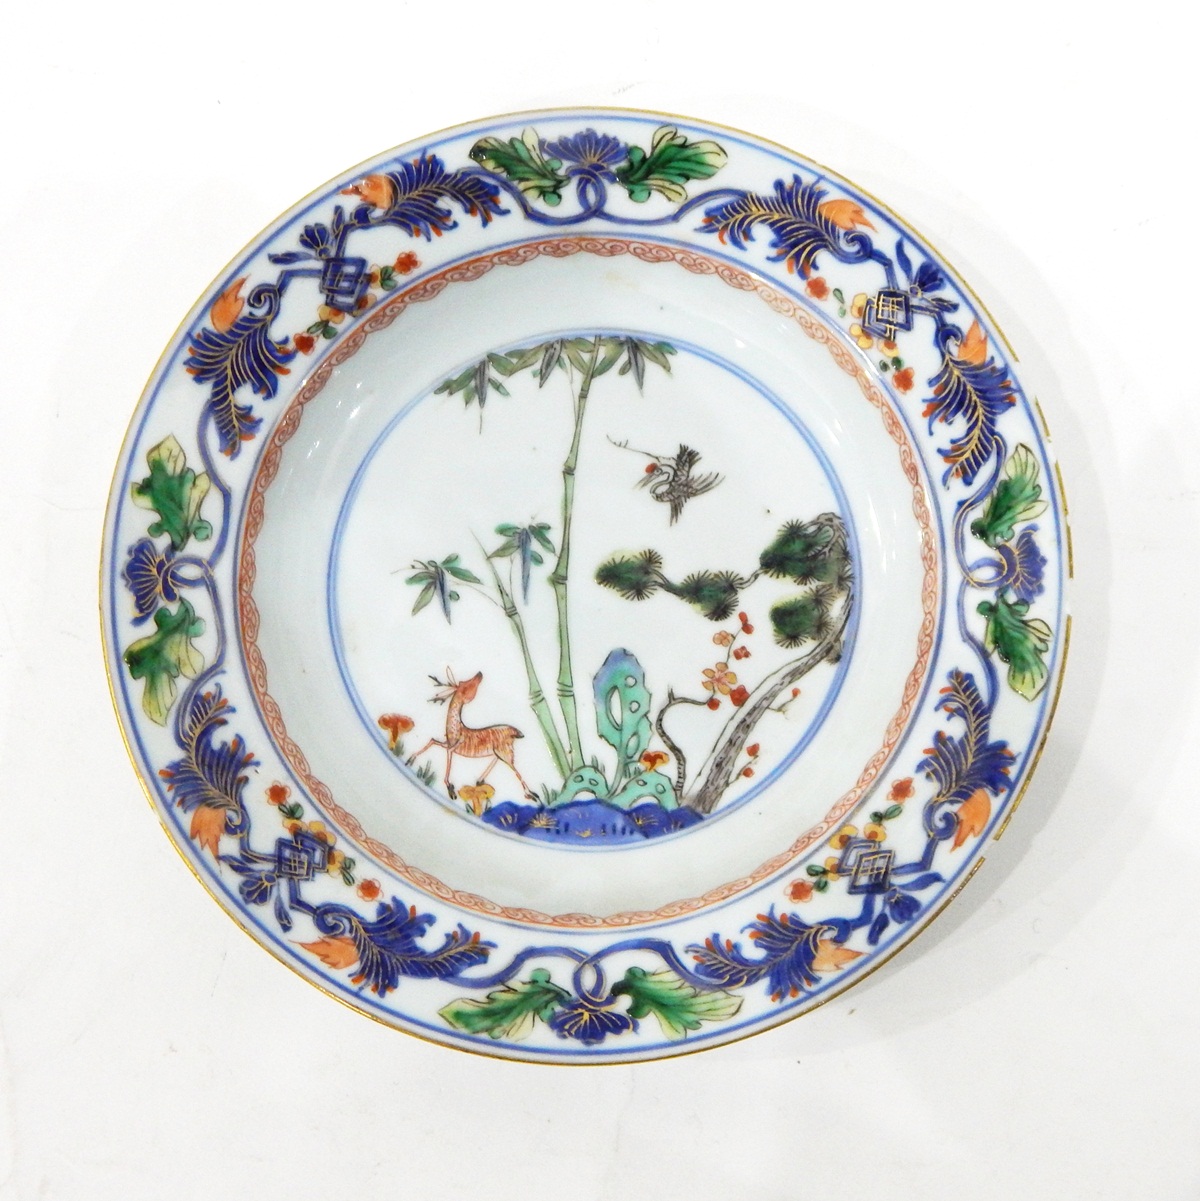 19th century Chinese porcelain plate, the centre decorated with a deer beneath bamboo,